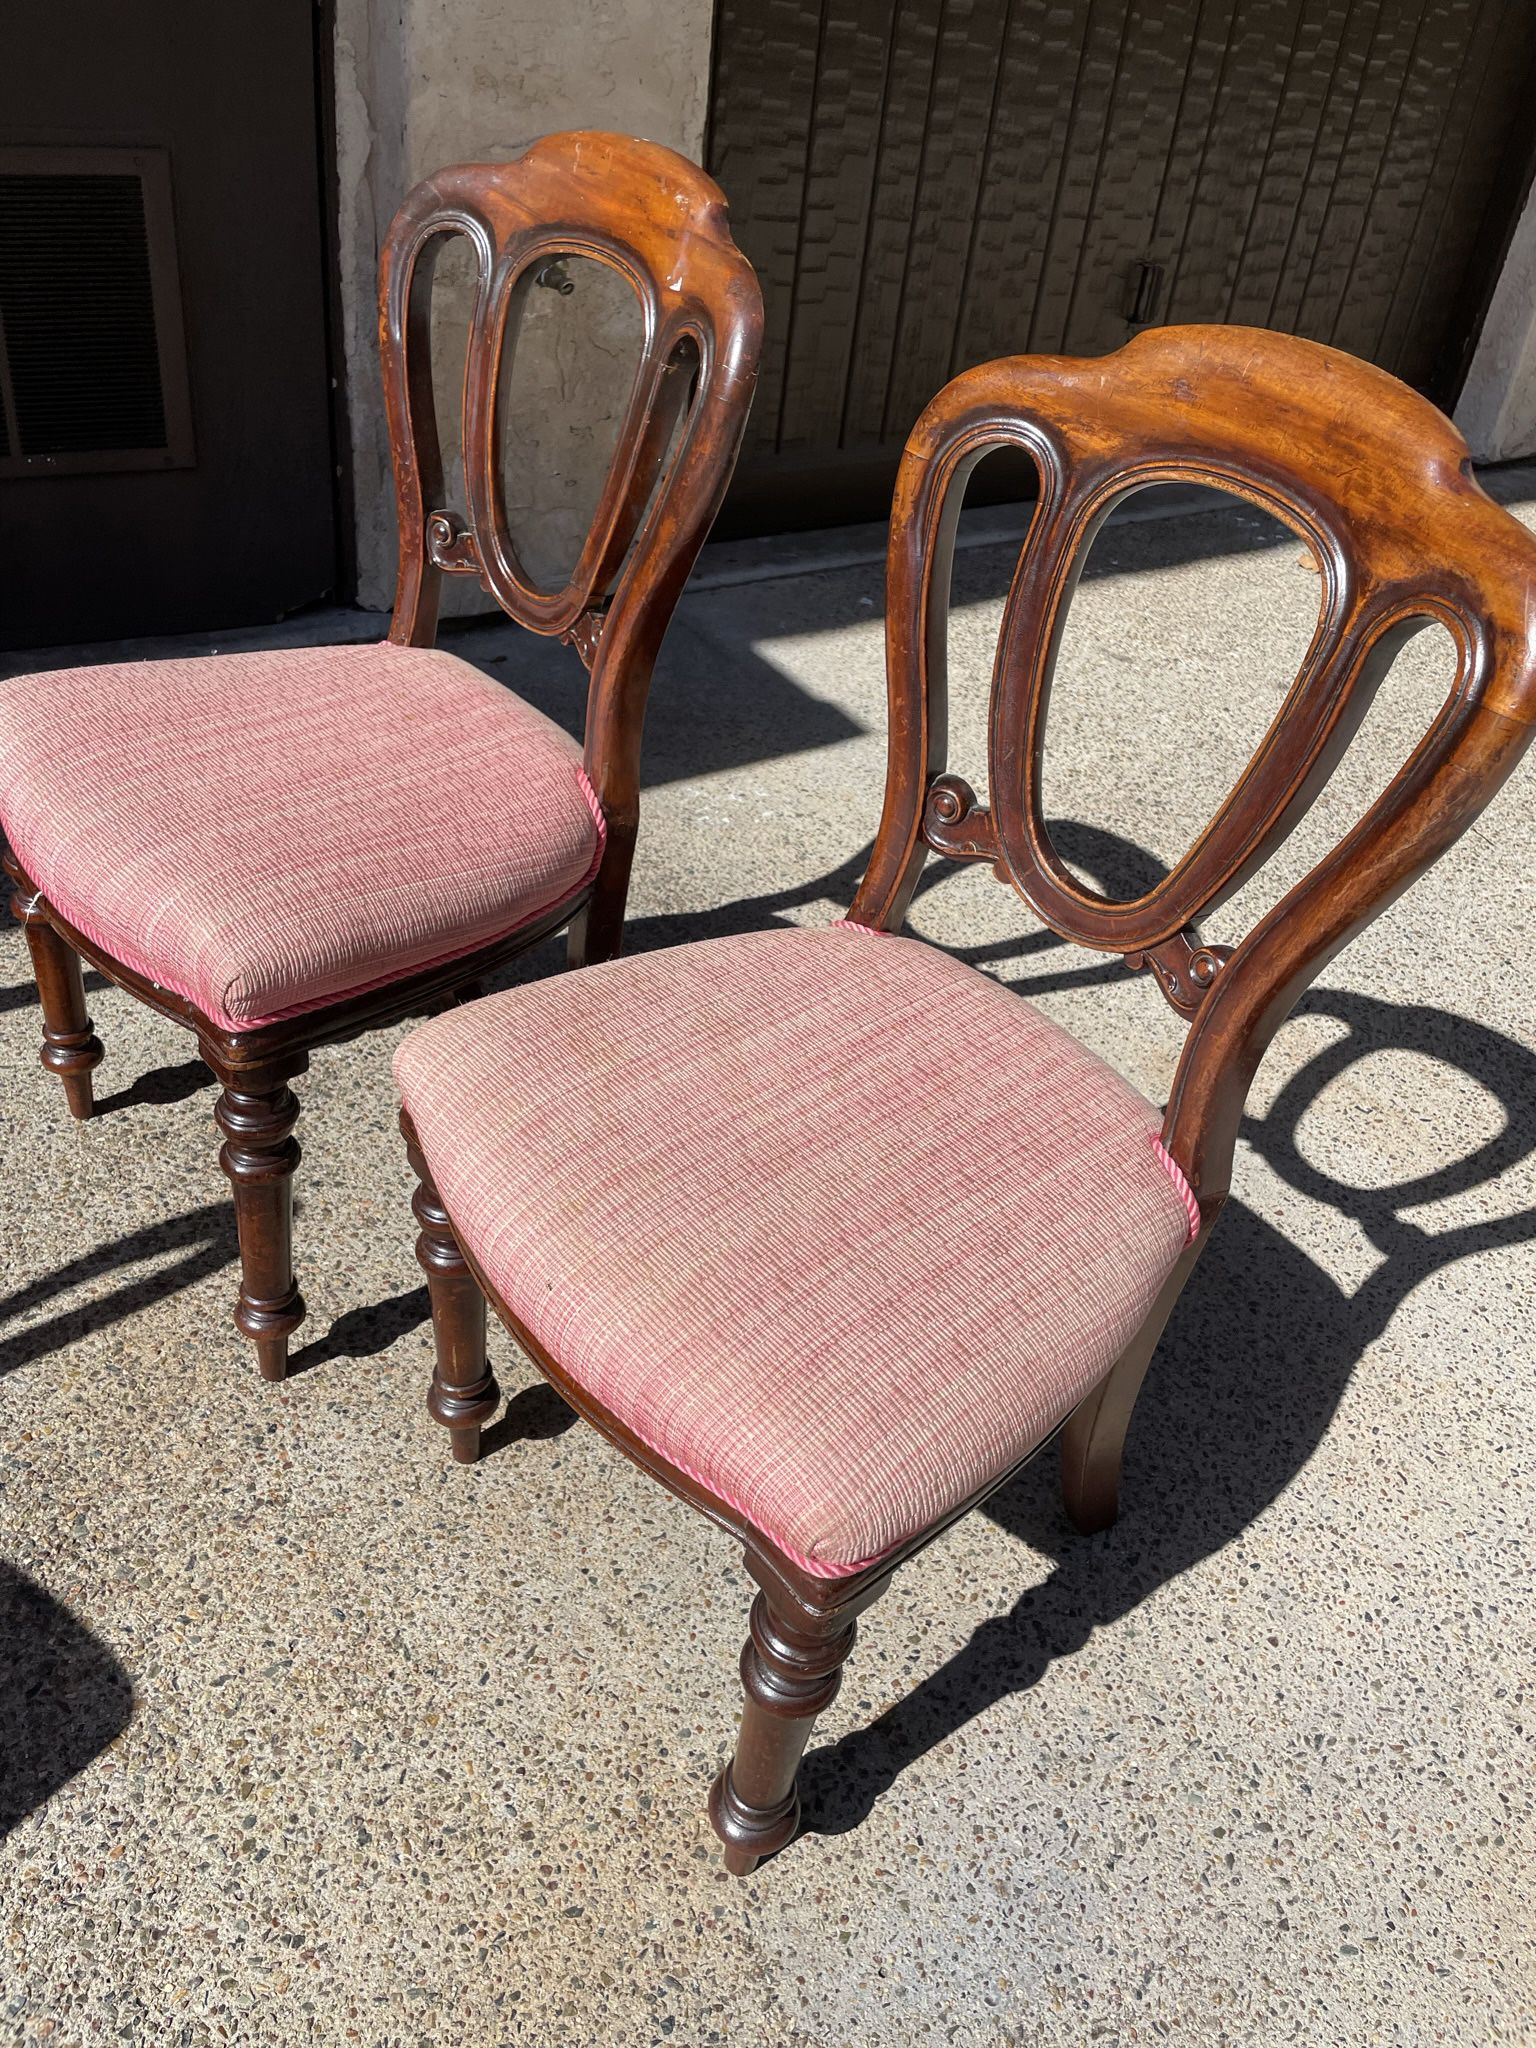 Beautiful Antique Pair Of Chairs. 92014